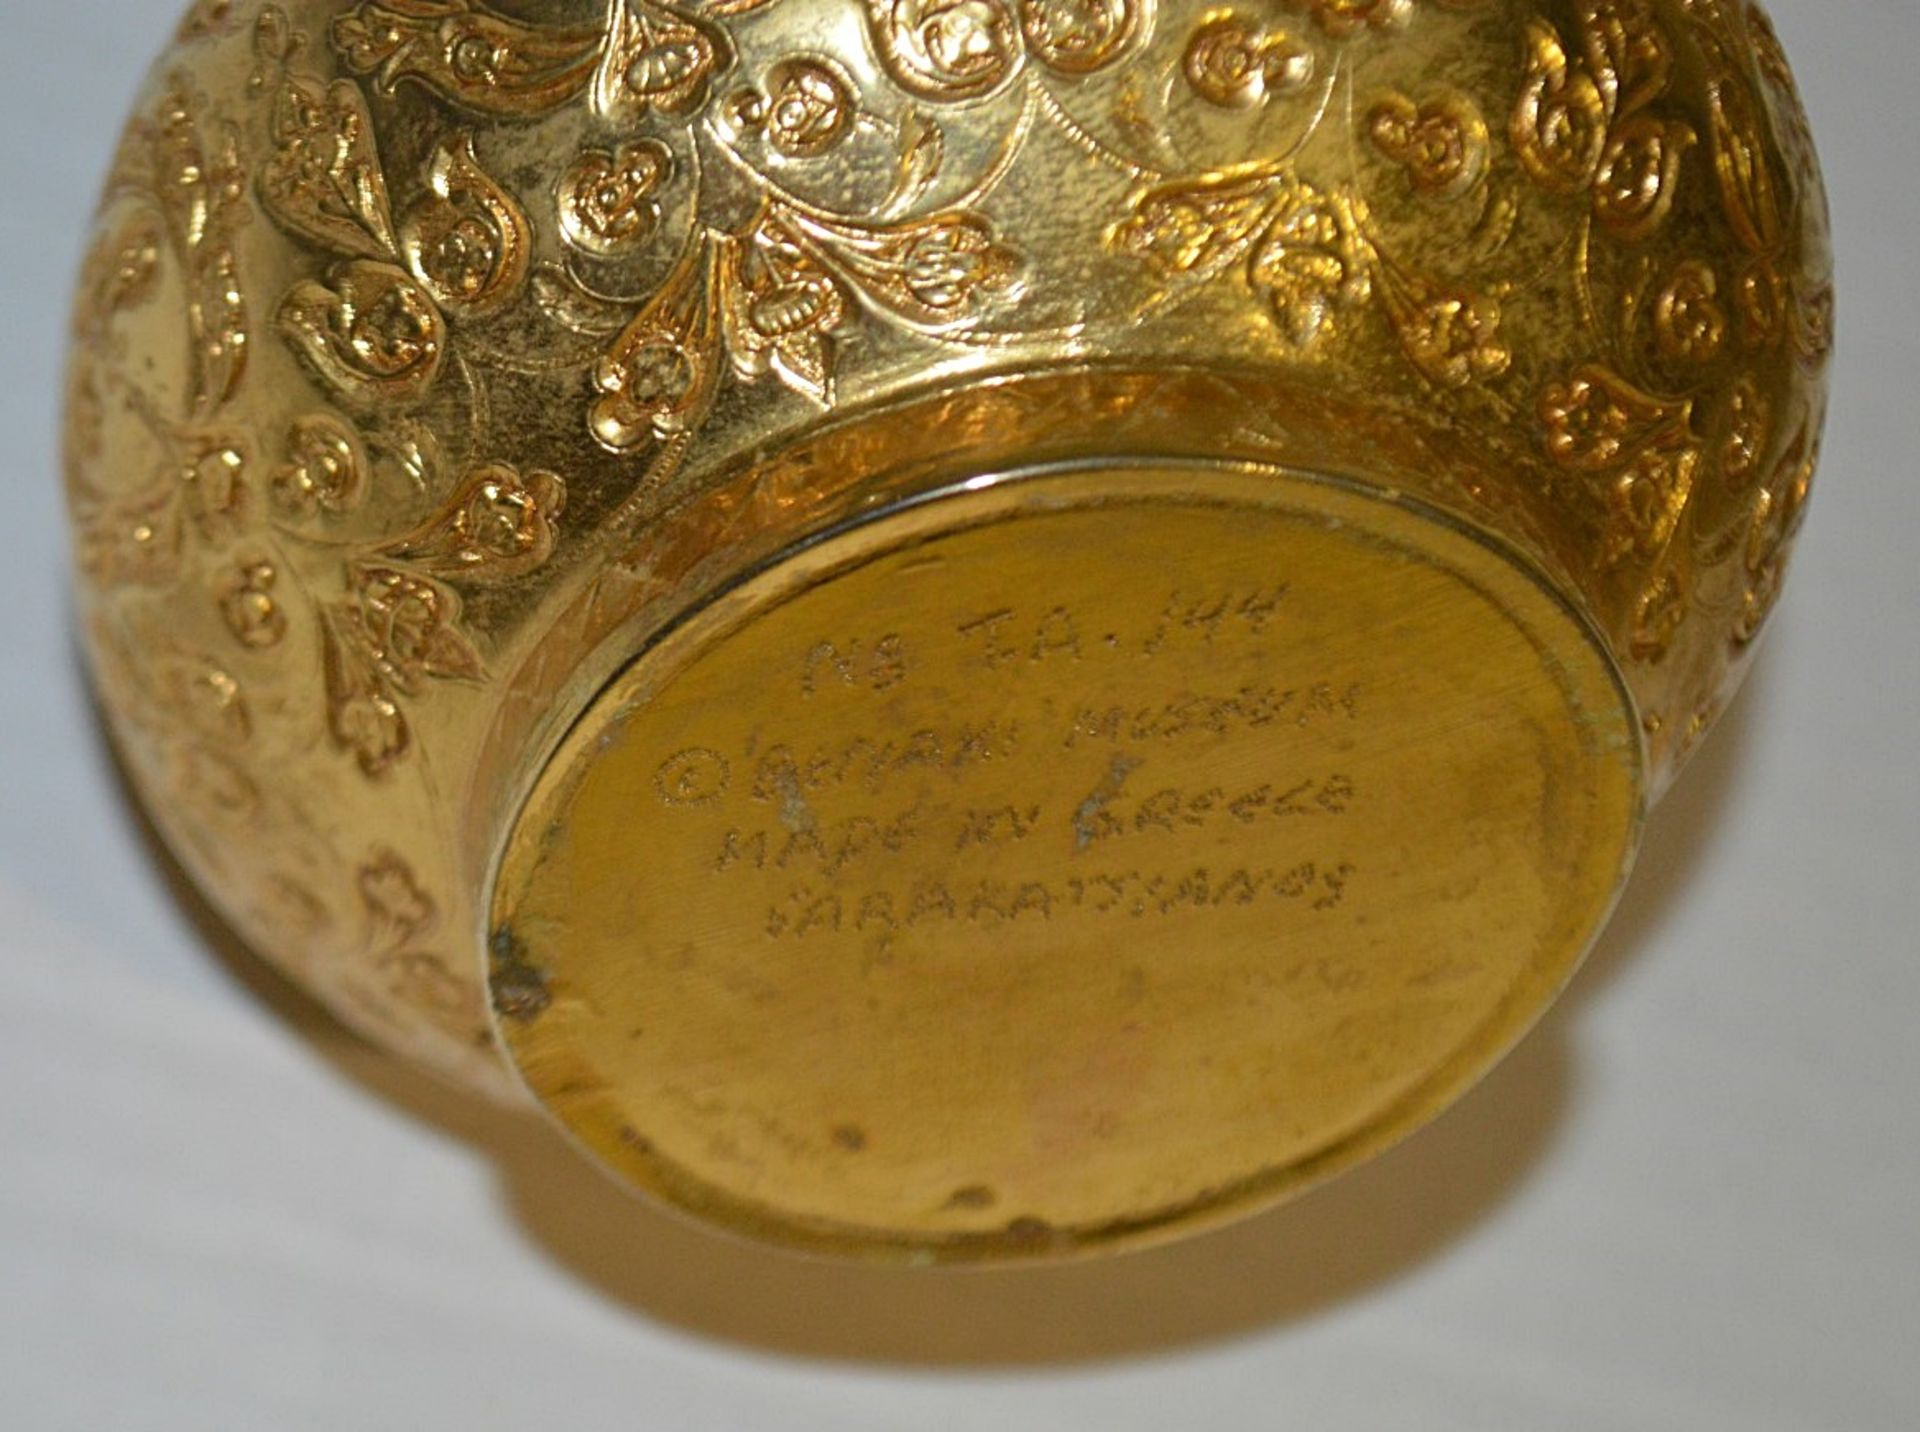 1 x Byzantine Holy Oil Flask - Benaki Museum Replica In Gilt Metal - Hand Engraved Details On The - Image 6 of 6